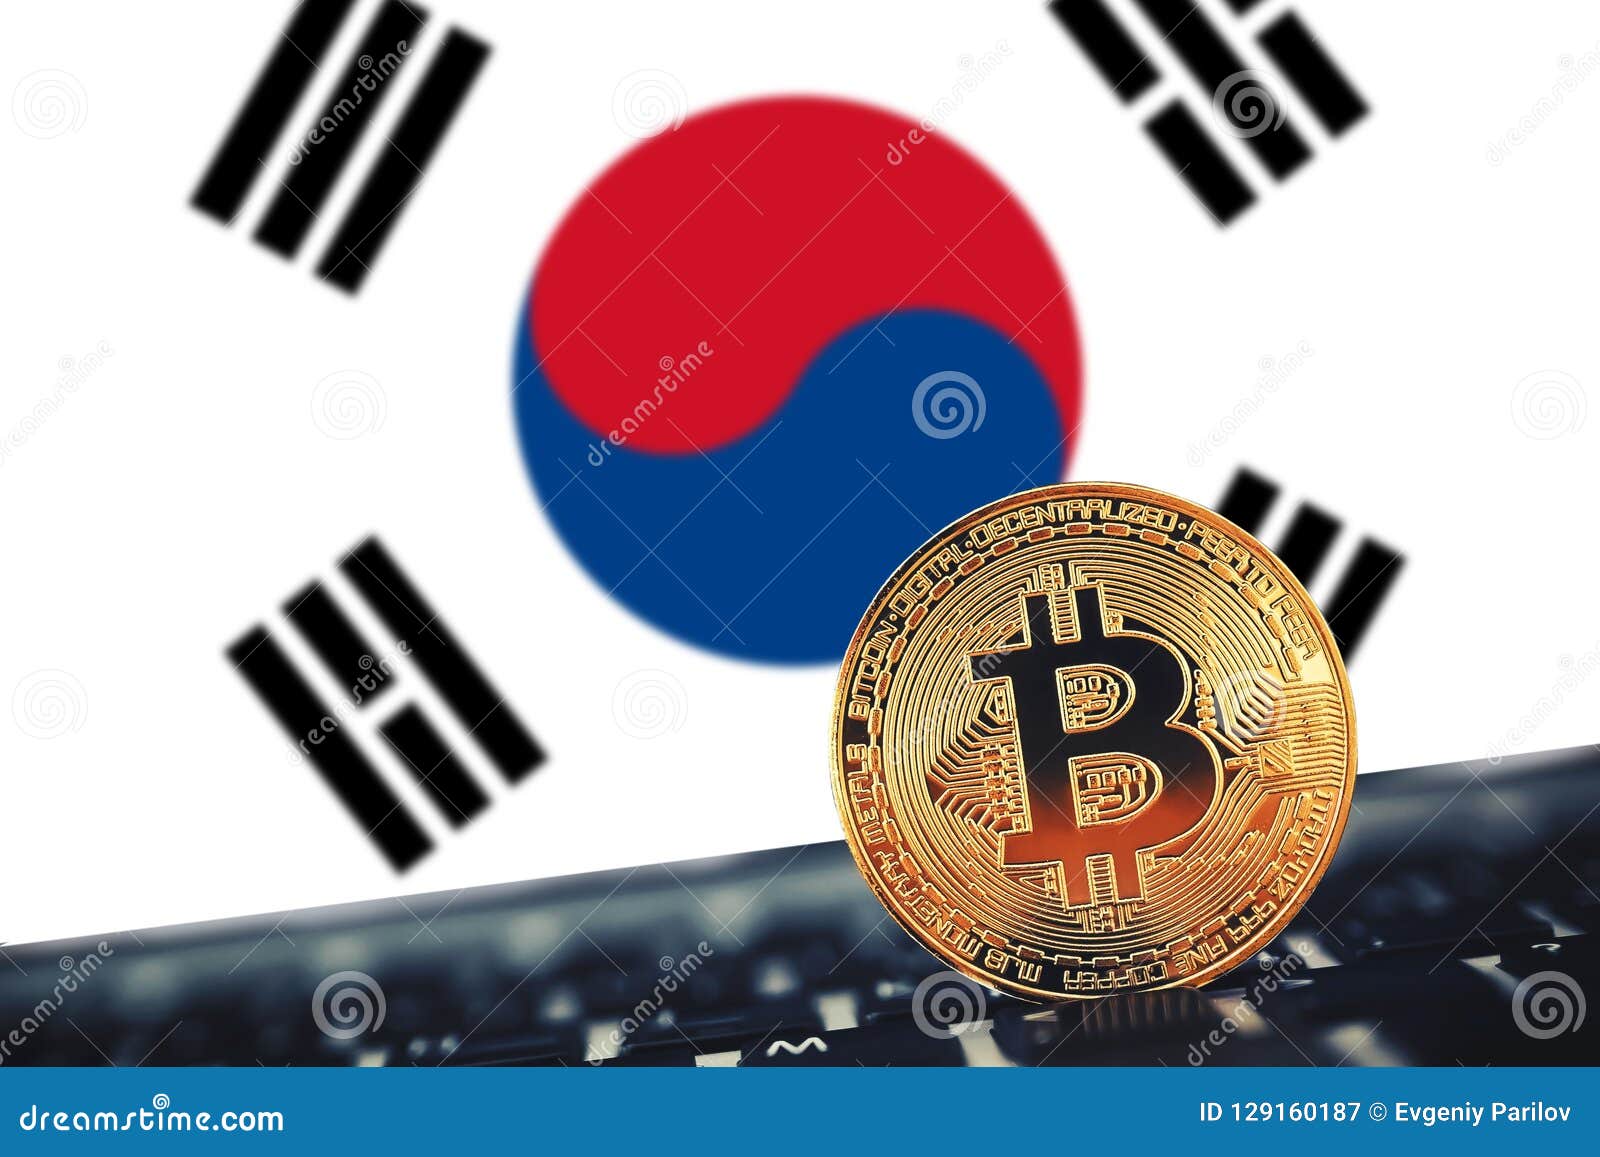 best site to buy bitcoin in south korea